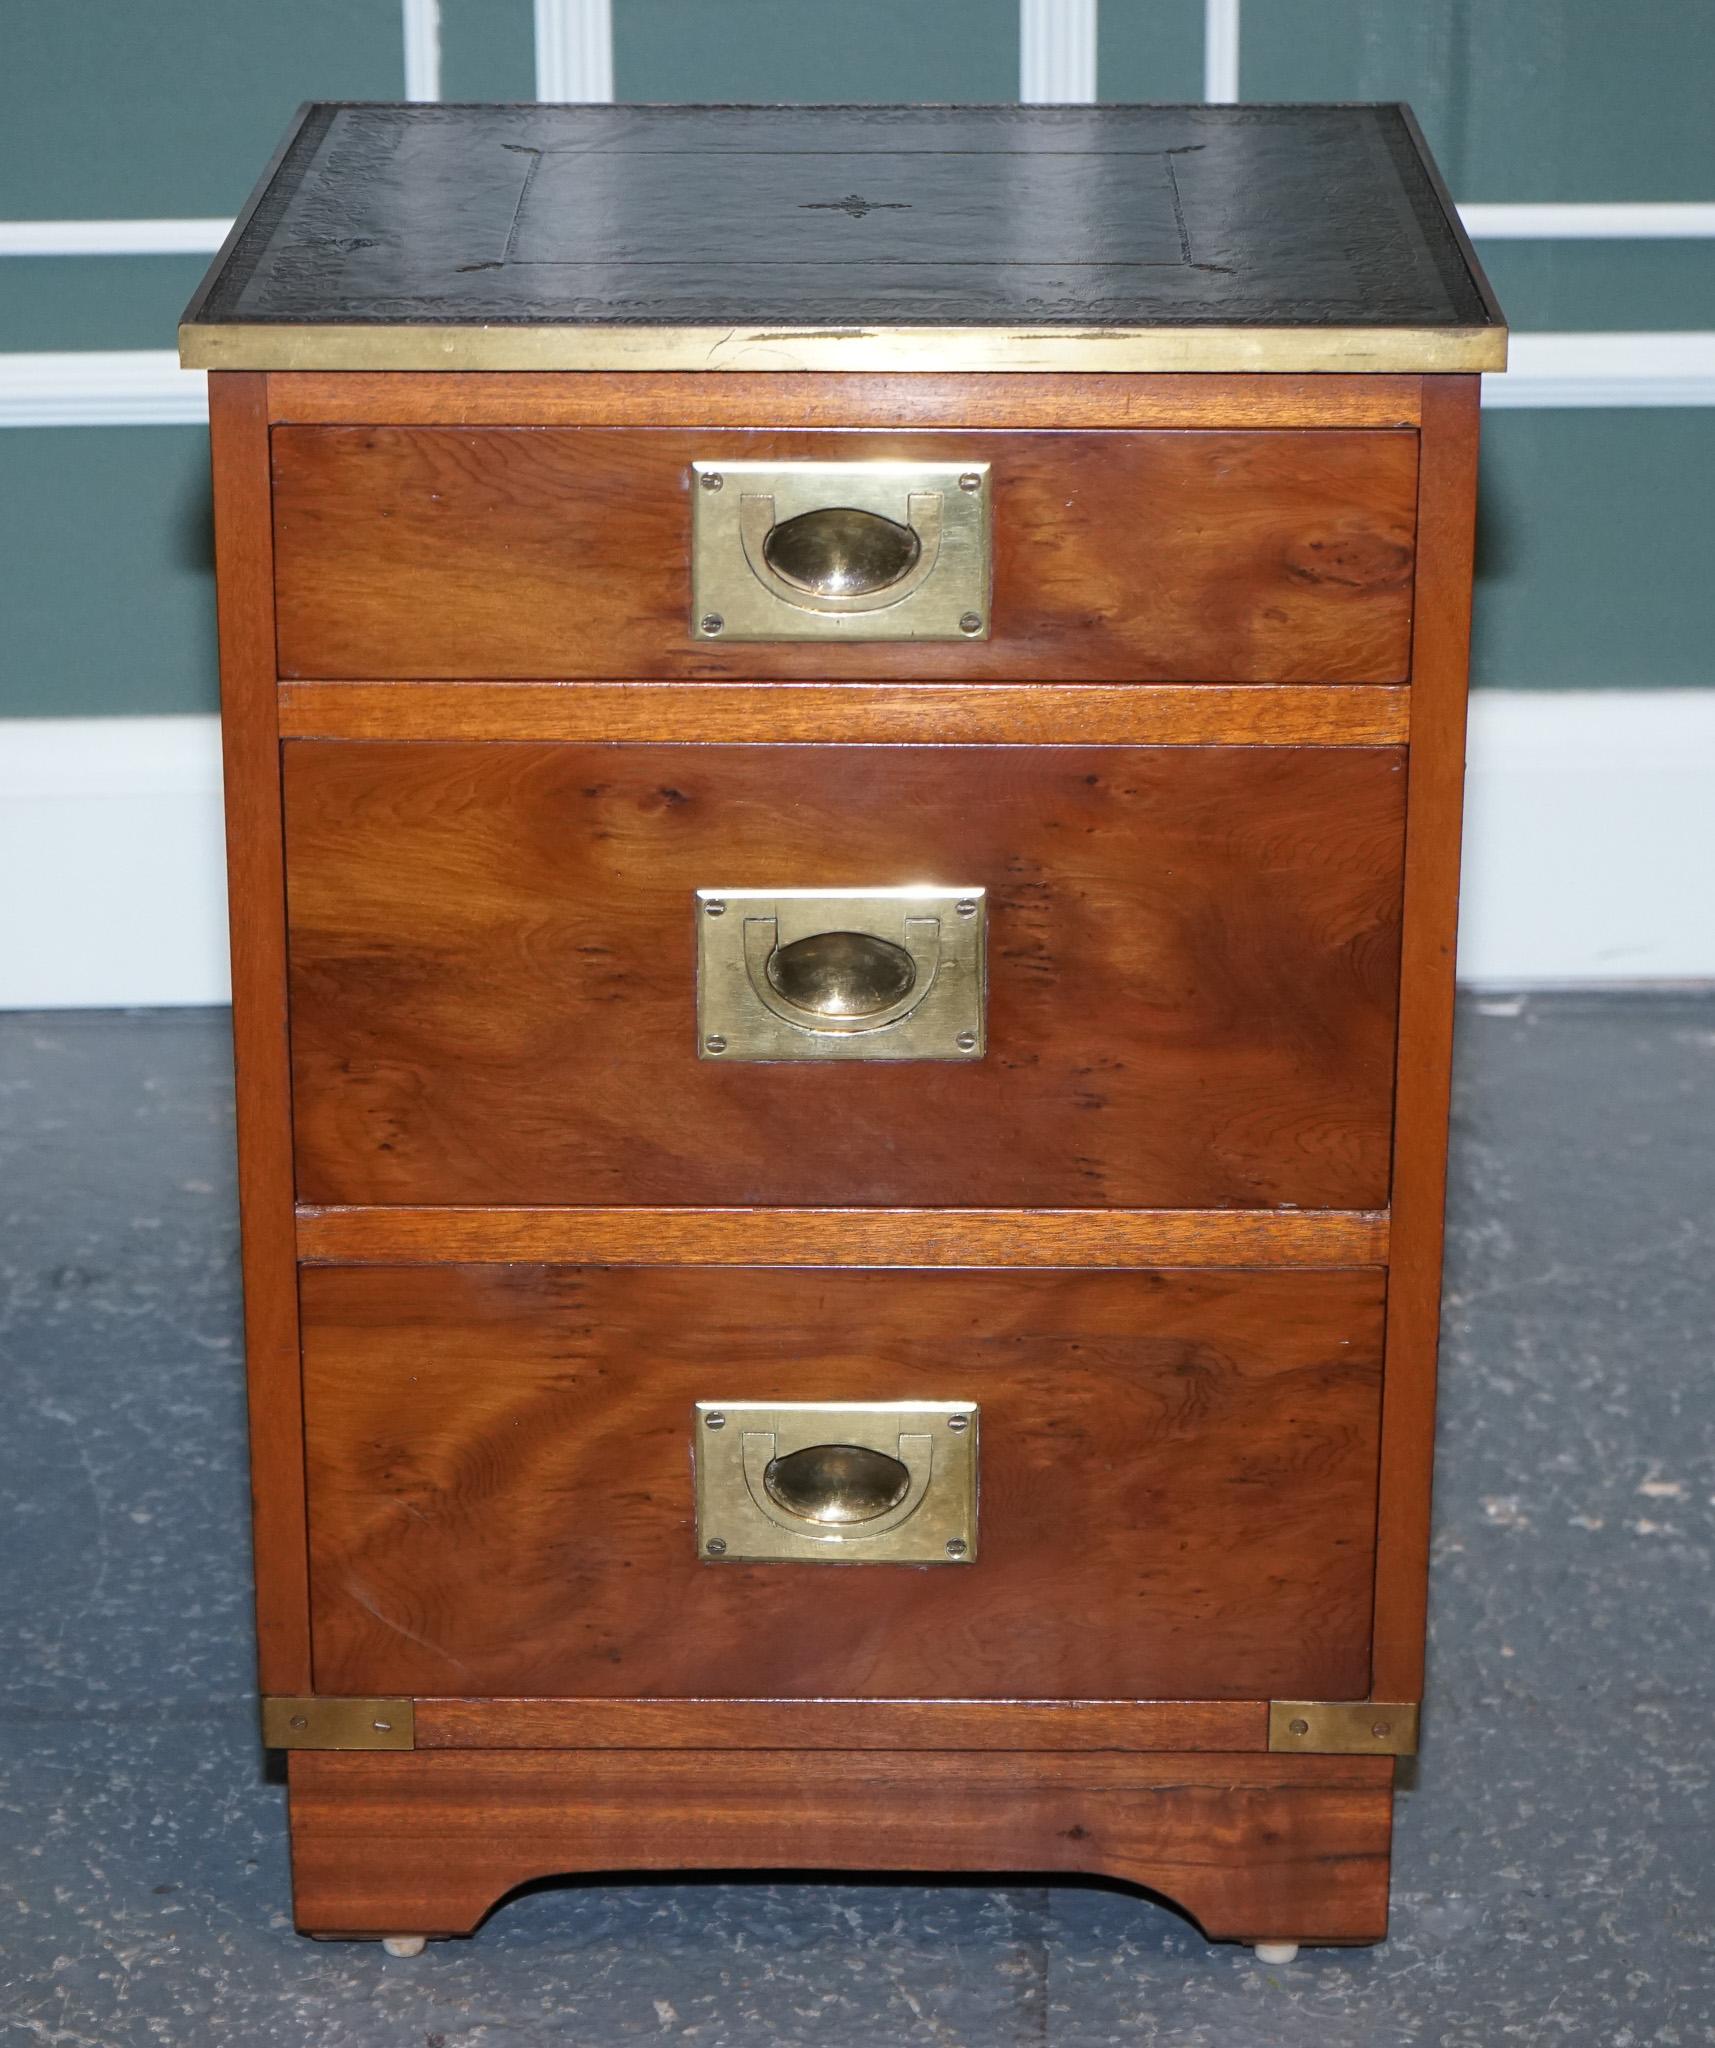 Military Campaign Yew Wood Bedside Nightstand End Table Green Leather Top In Good Condition For Sale In Pulborough, GB